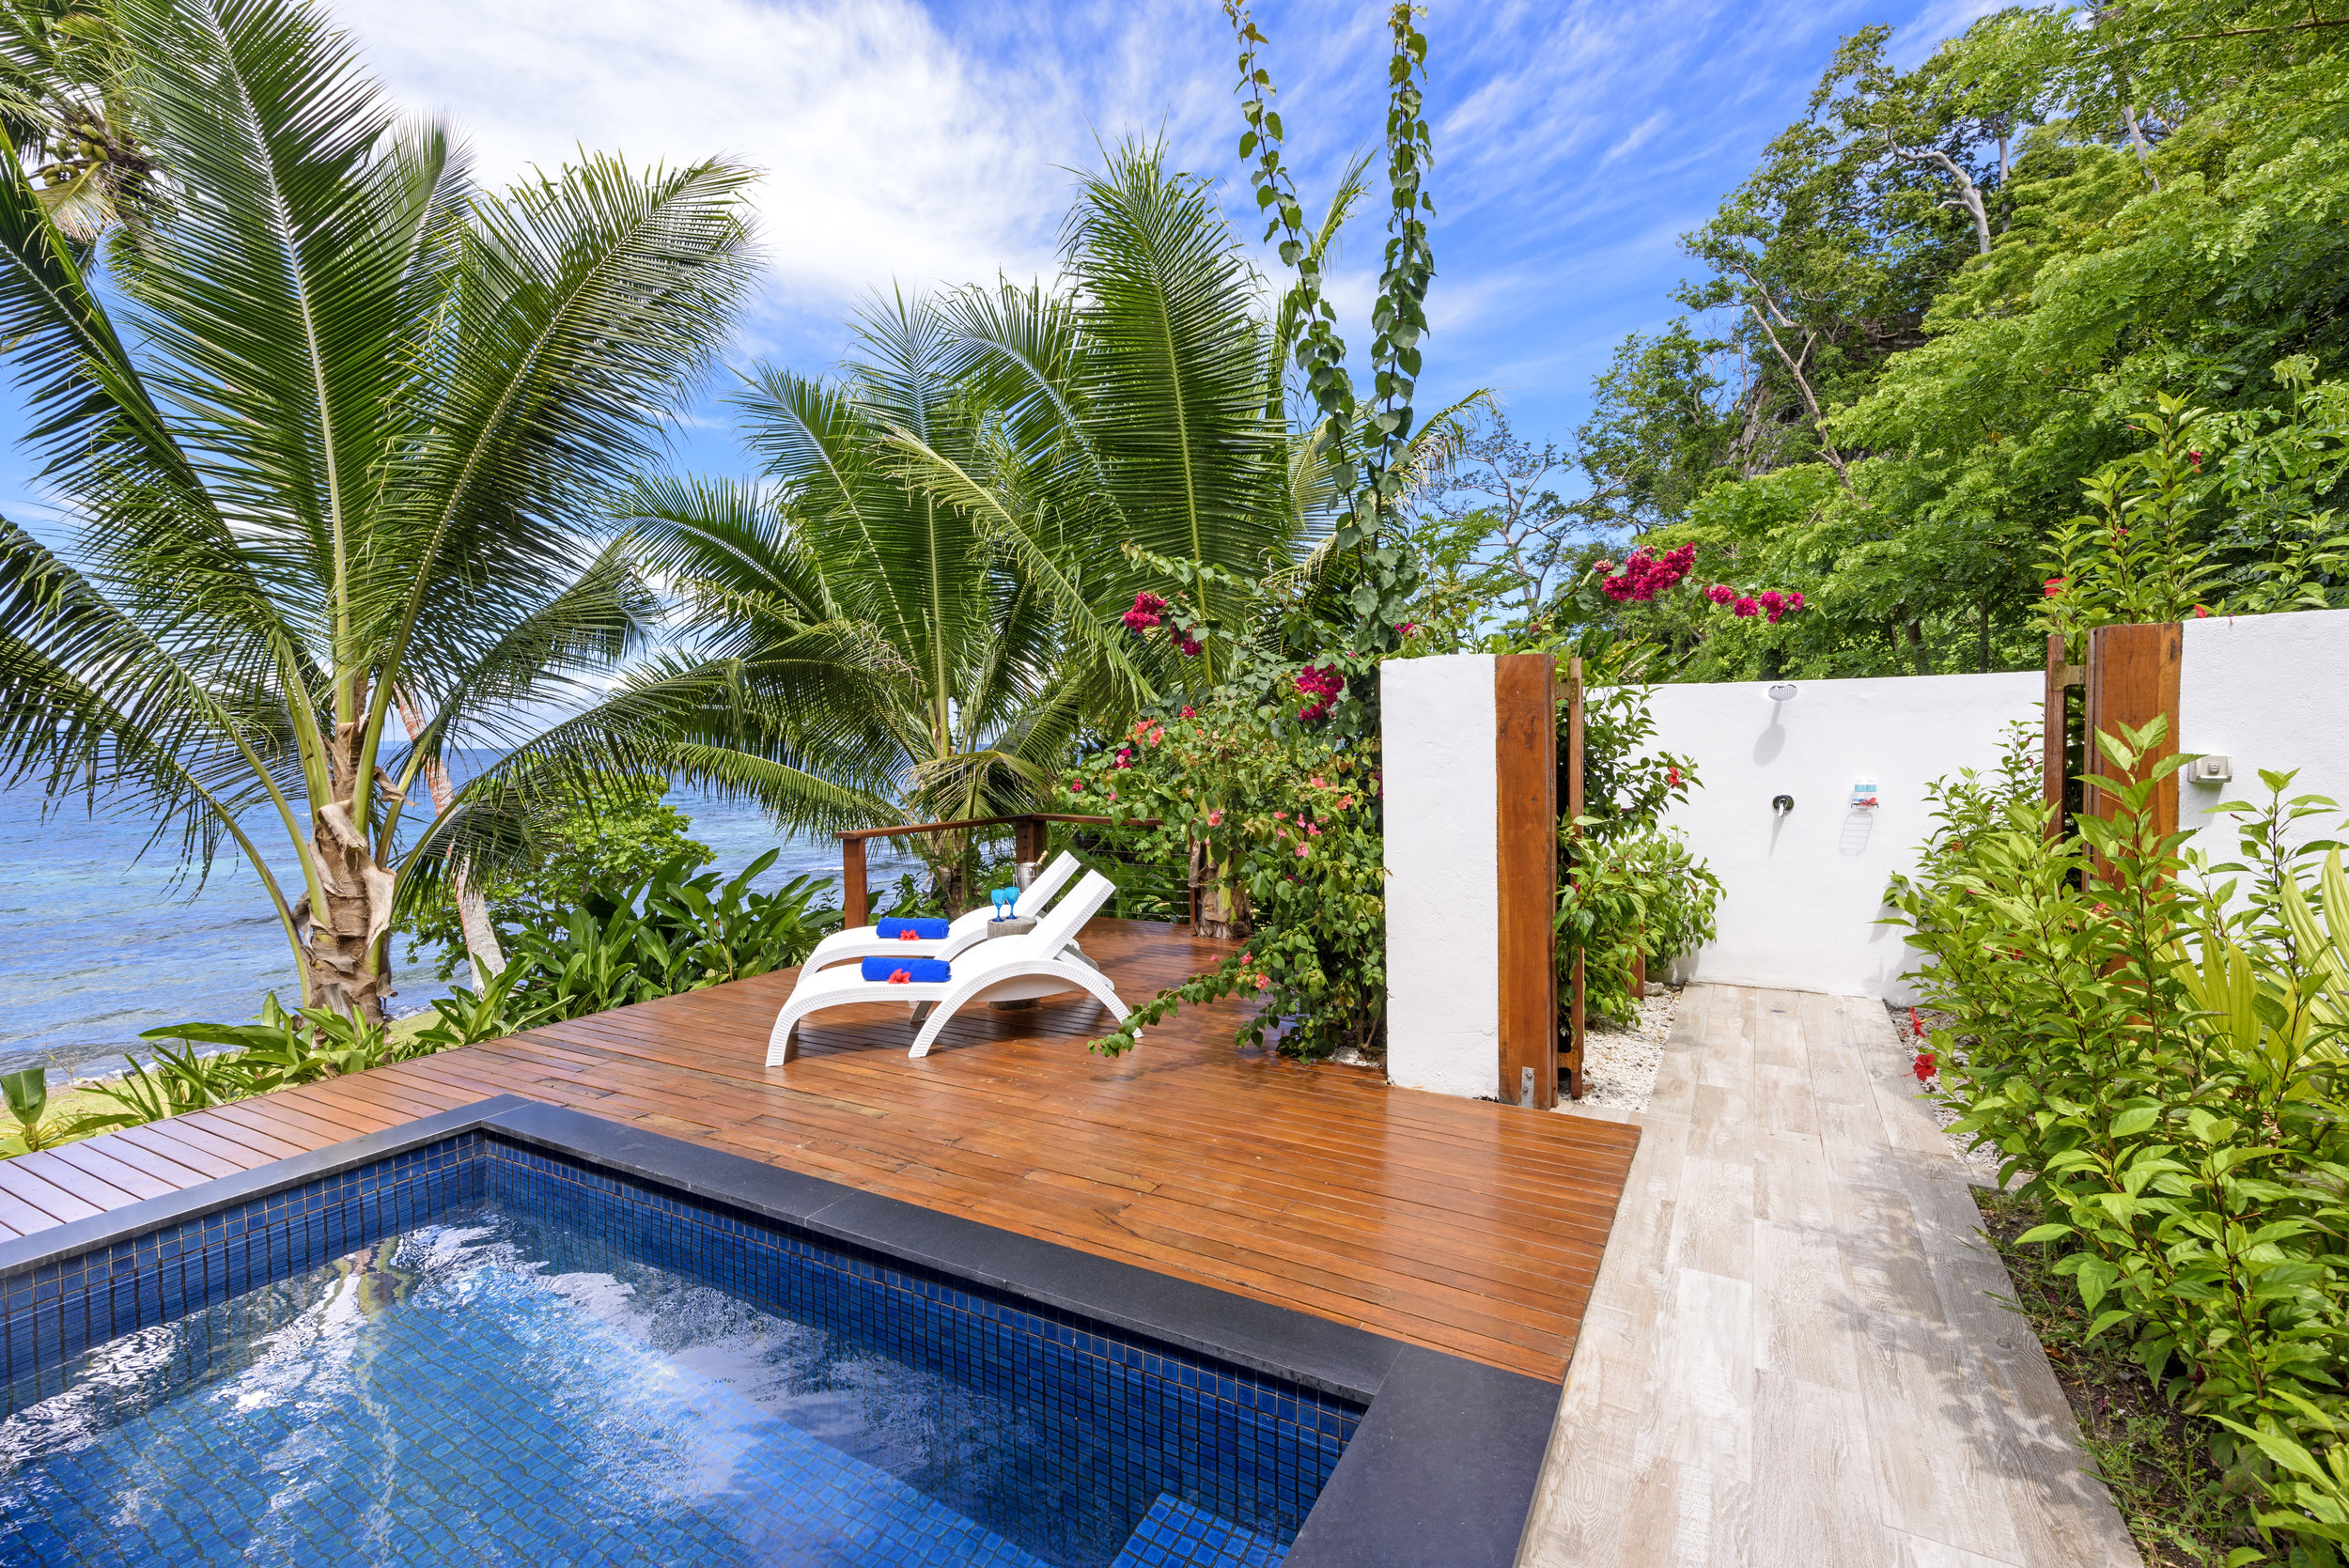 Royal Retreat - Outdoor bathroom & plunge pool on the deck with ocean views, The Remote Resort Fiji Islands